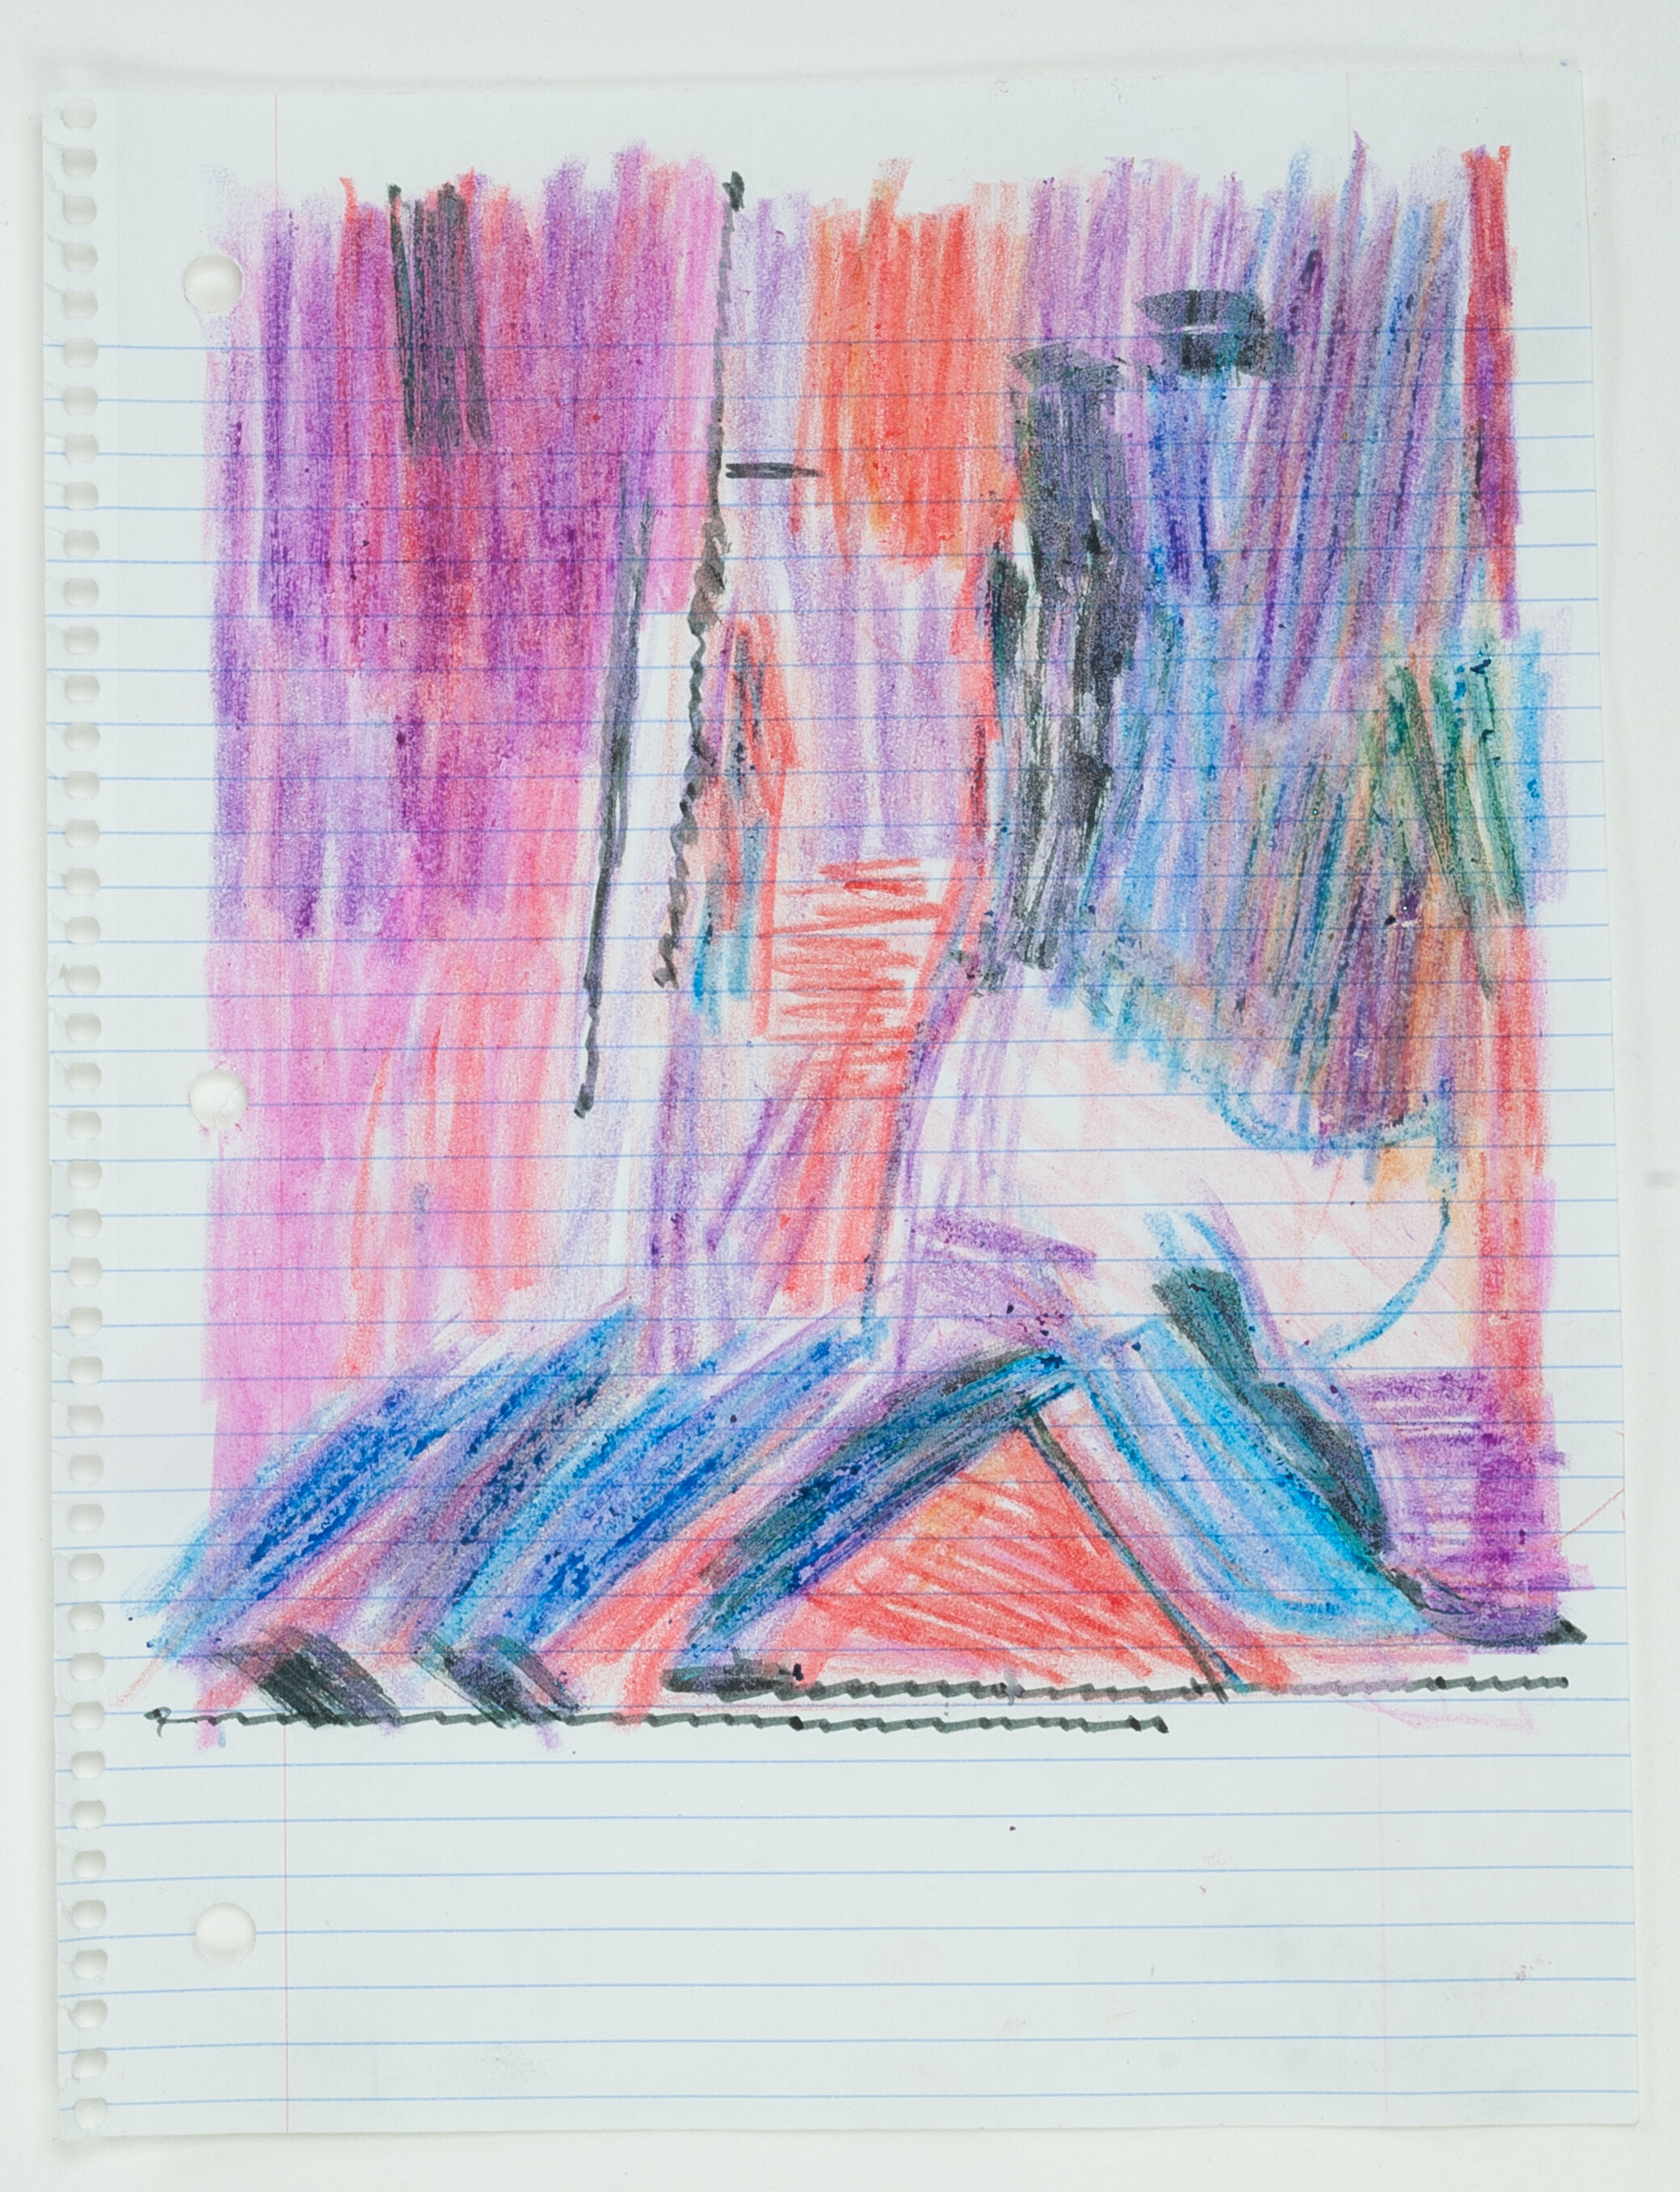   sm_wop2020_17 , 2020 crayon and ink on paper, 11 x 8.5 in. 